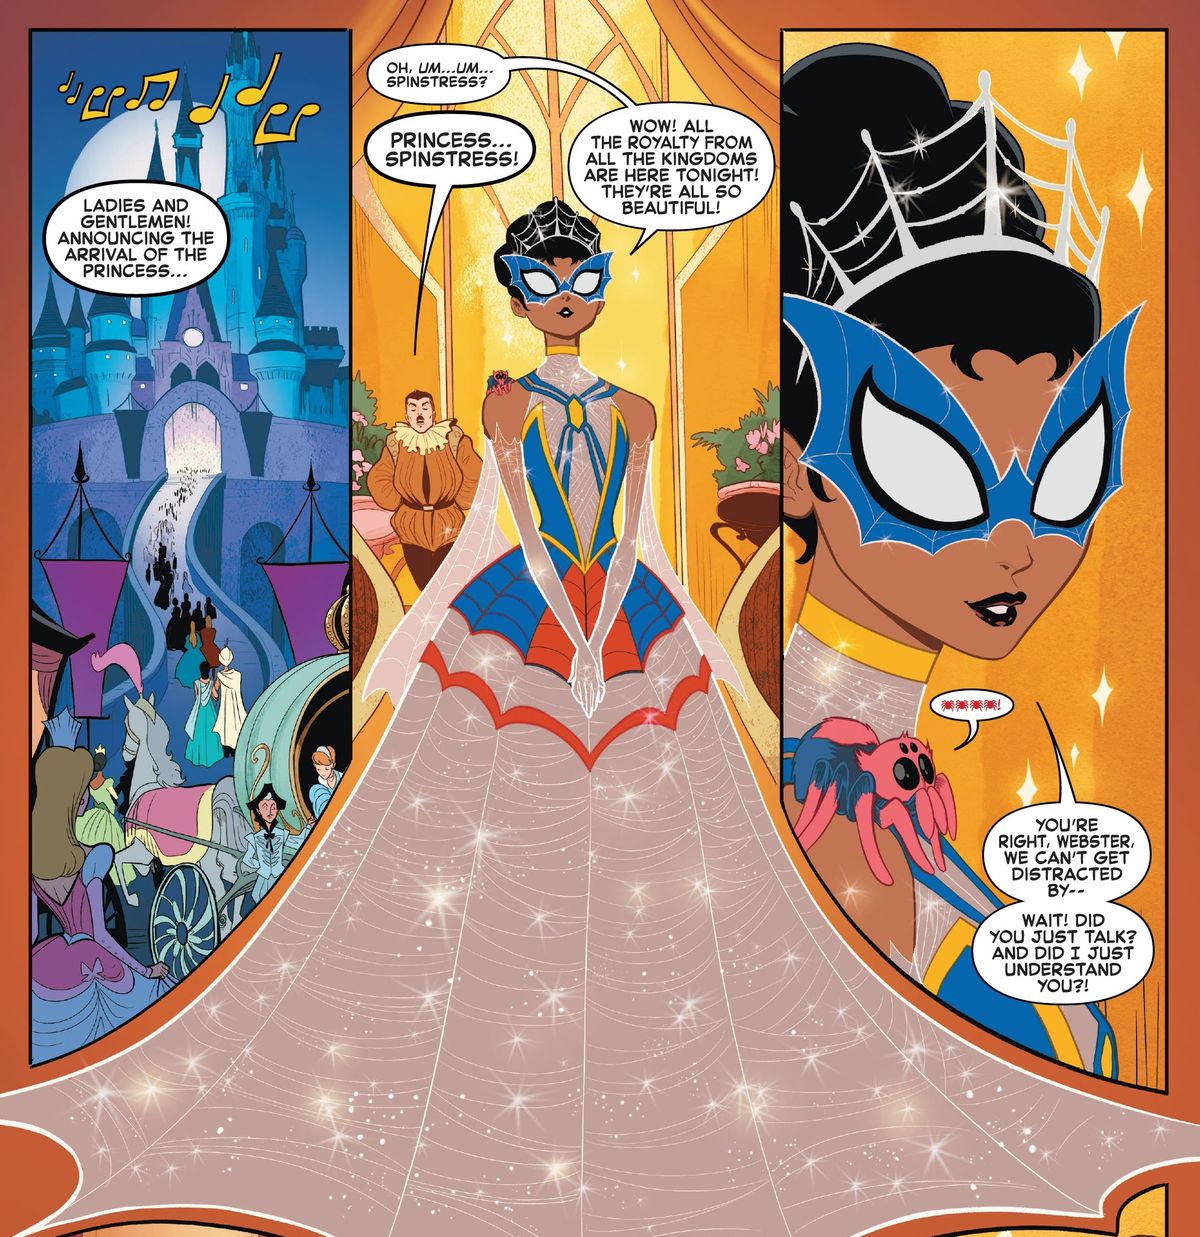 Princess Spinstress is introduced at a medieval ball, in her red and blue gown with its sparkling web skirt in Edge of Spider-Verse #4 (2022).